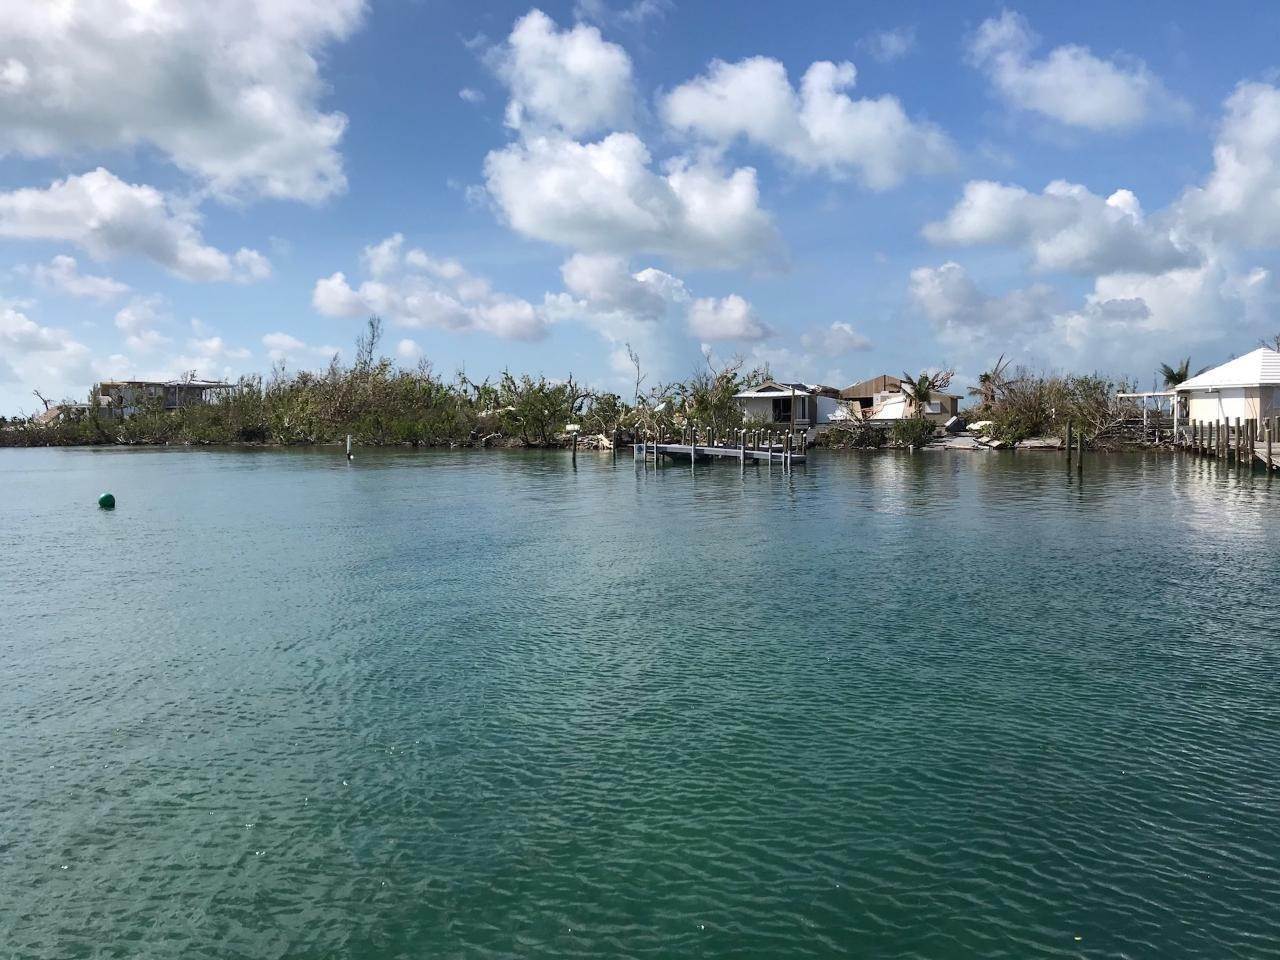 5. Lots / Acreage for Sale at Green Turtle Cay, Abaco, Bahamas